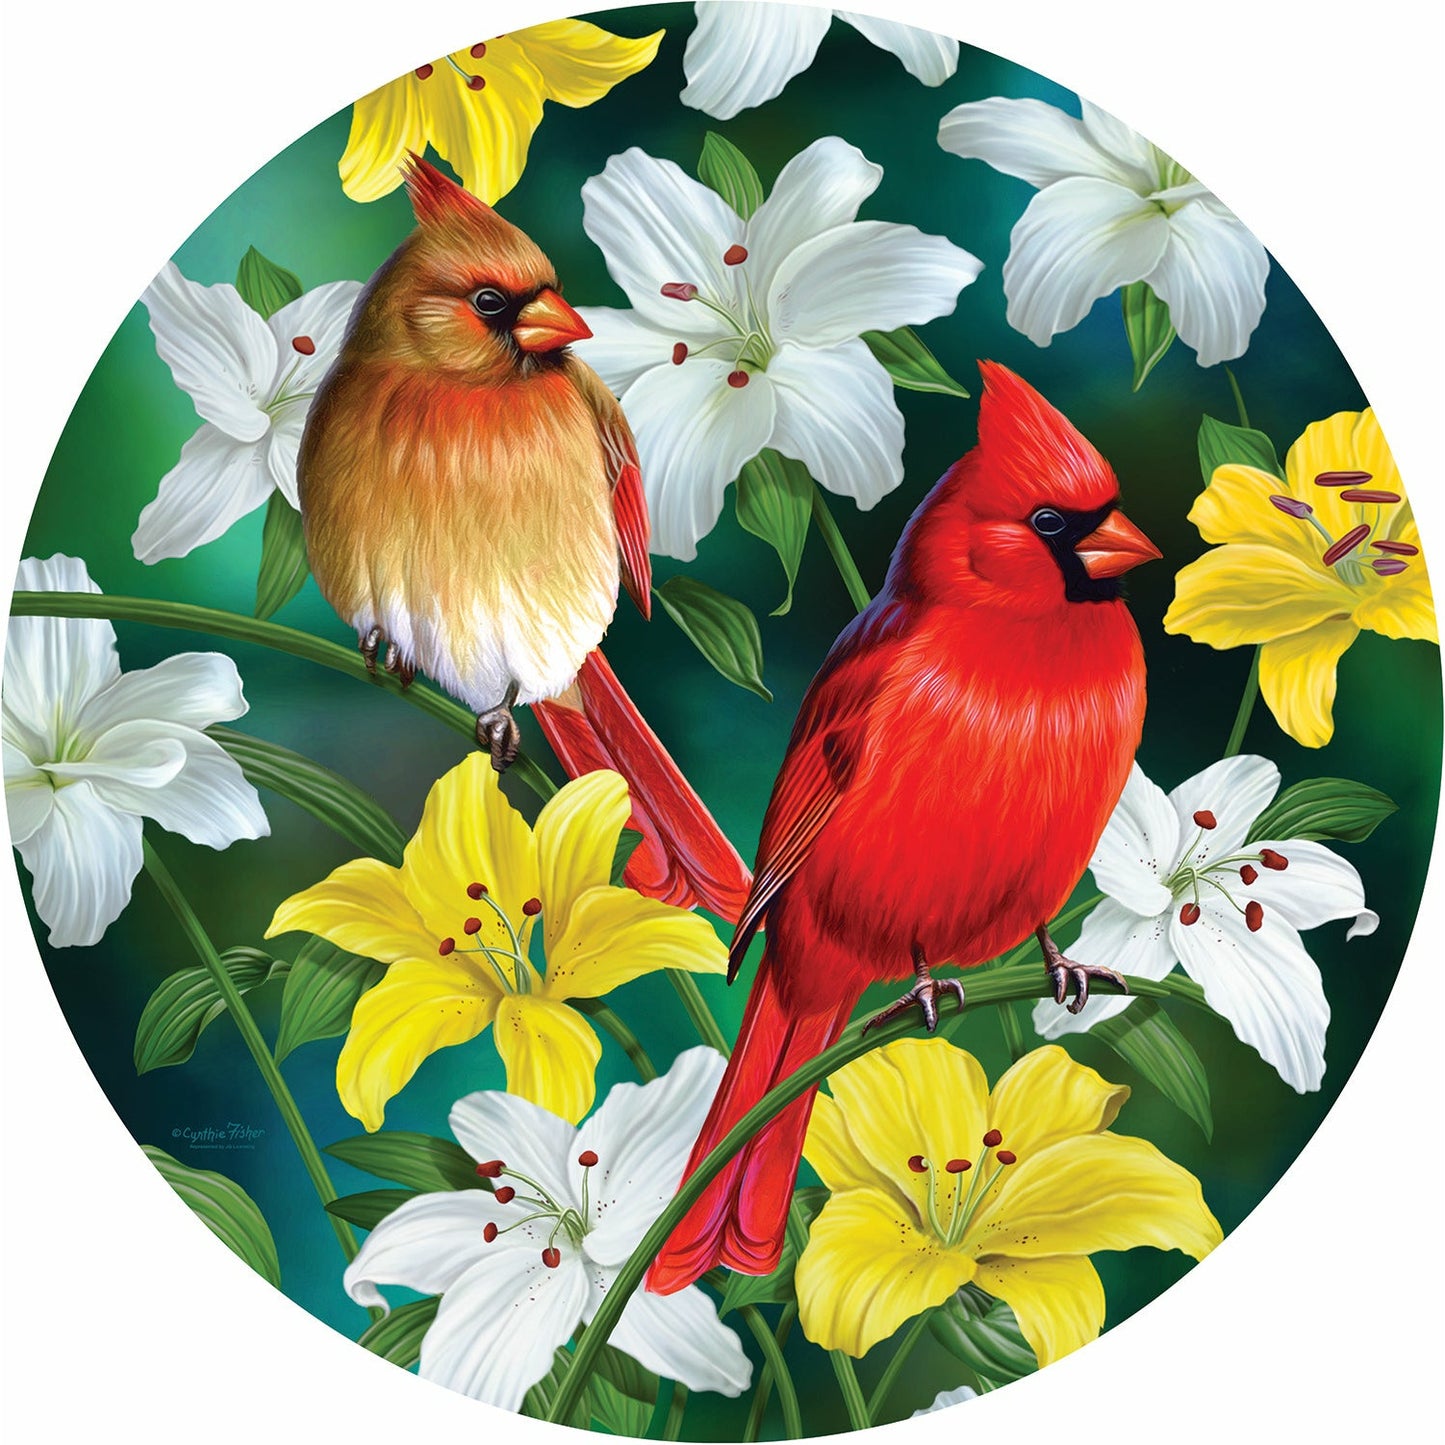 Cardinals in the Round Puzzle